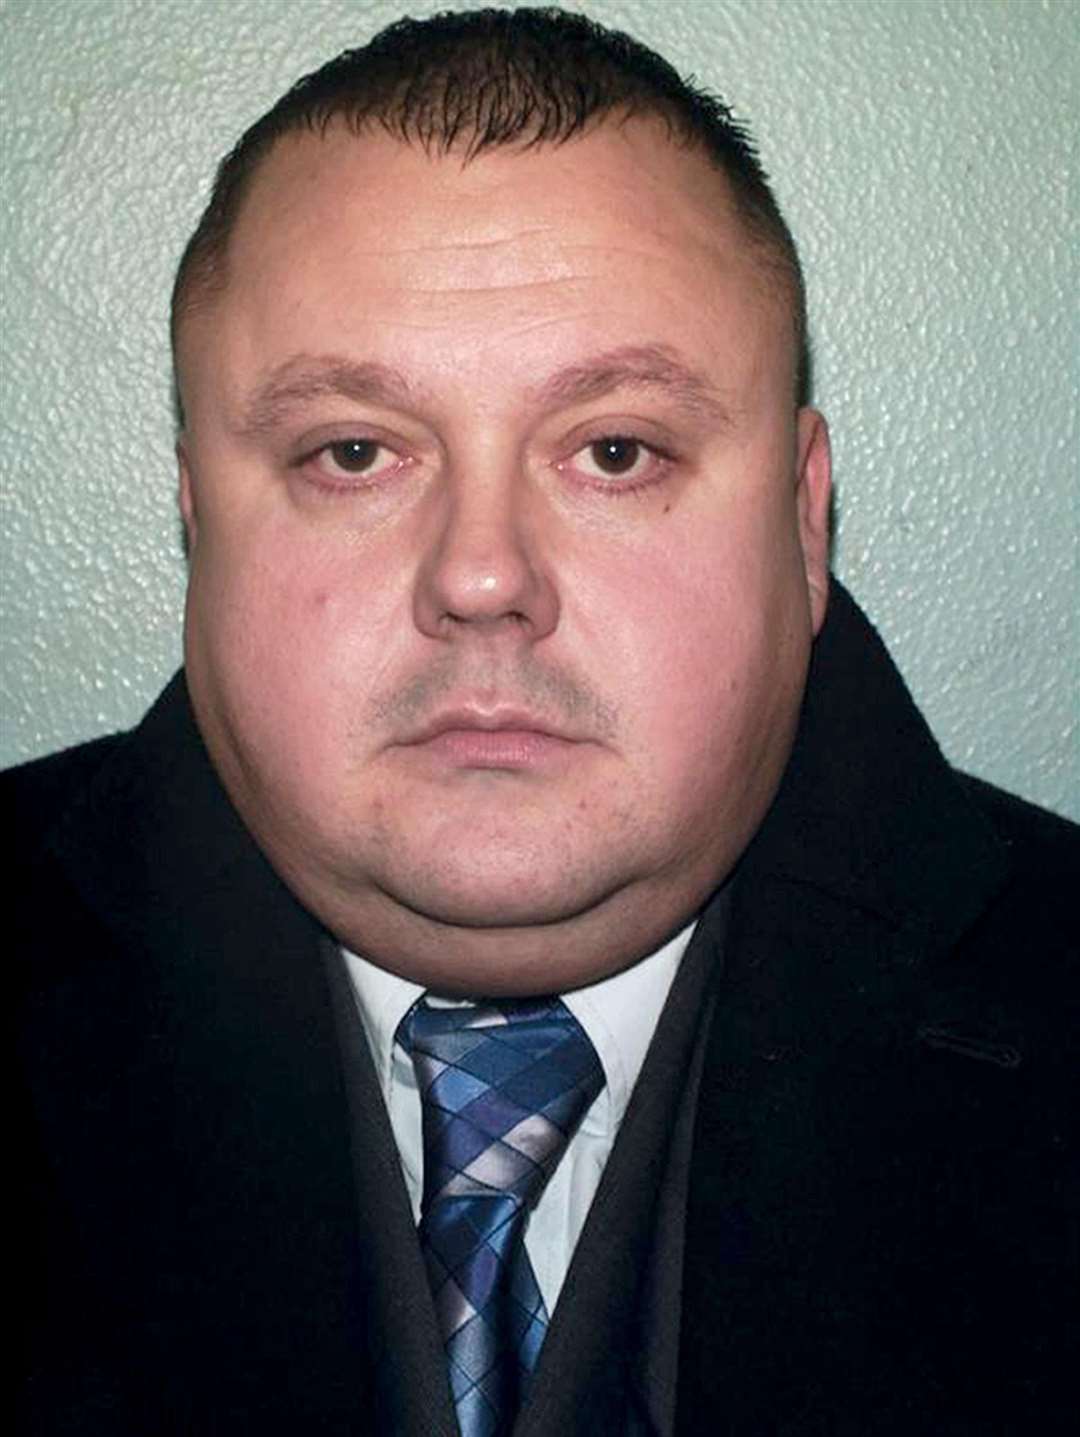 Serial killer Levi Bellfield, who is engaged and has requested a prison wedding, the Ministry of Justice has confirmed (Metropolitan Police/PA)